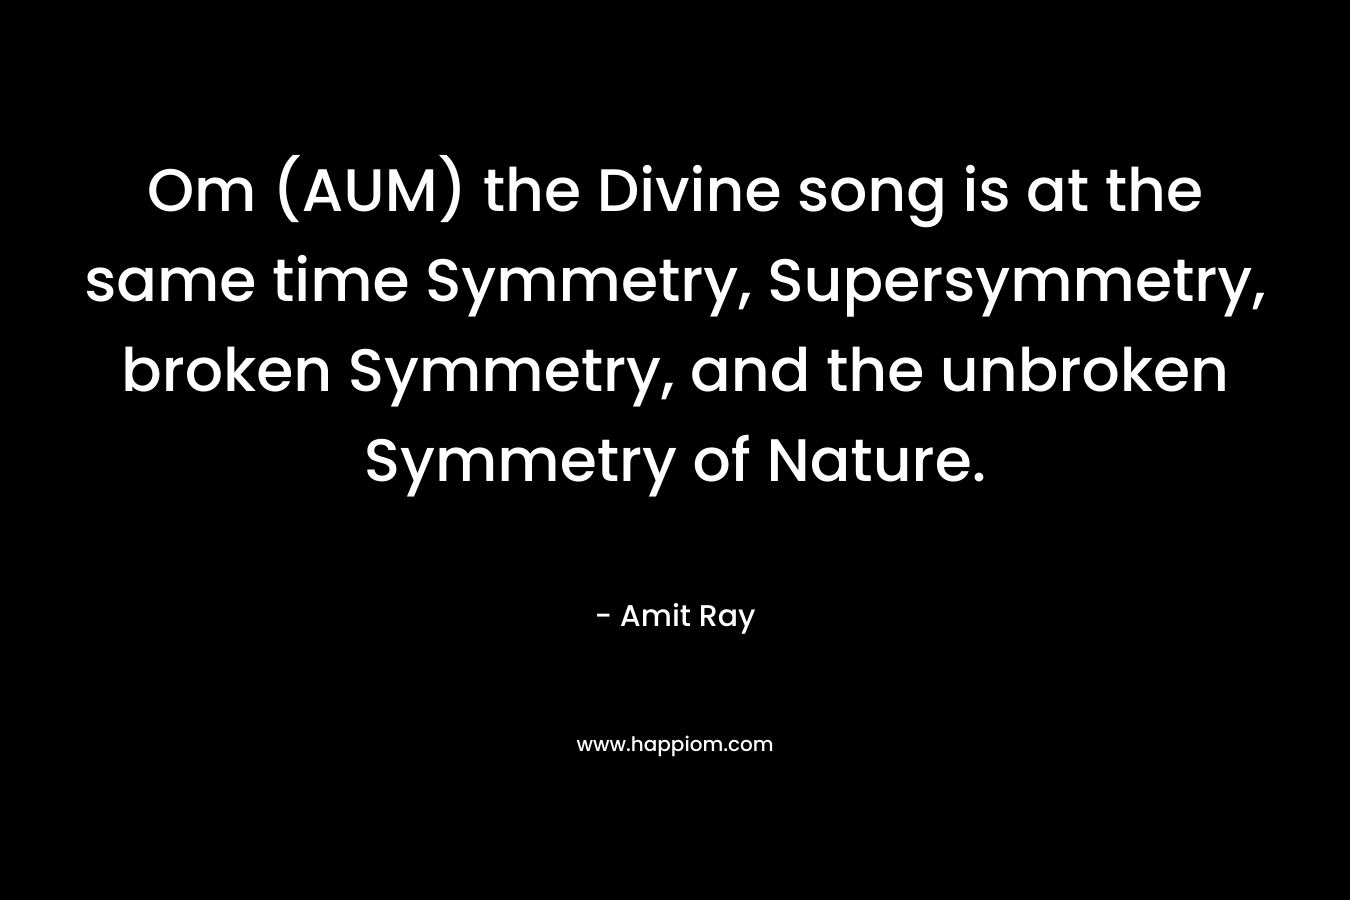 Om (AUM) the Divine song is at the same time Symmetry, Supersymmetry, broken Symmetry, and the unbroken Symmetry of Nature. – Amit Ray